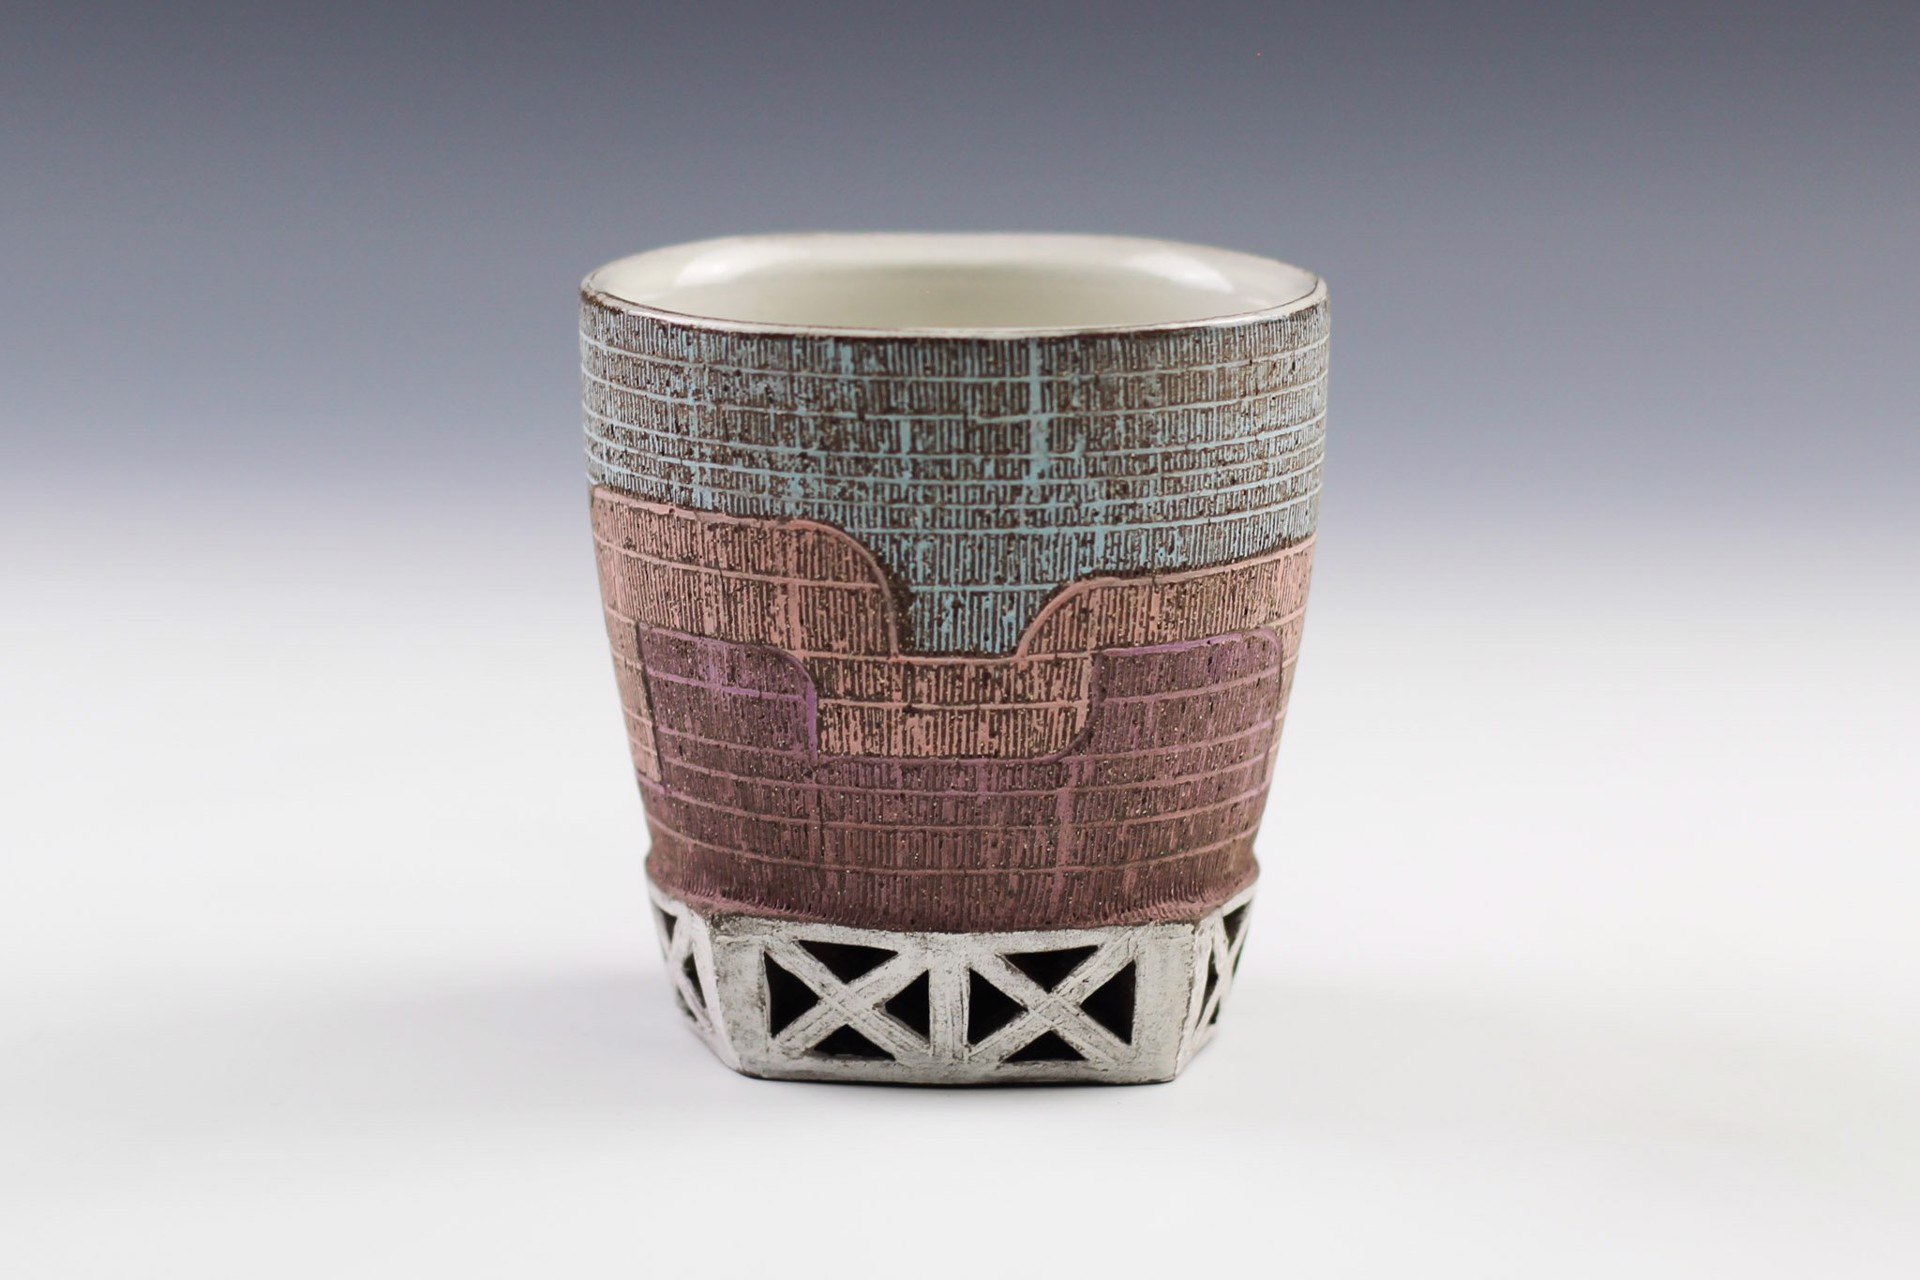 Carved Based Cup by Matt Repsher